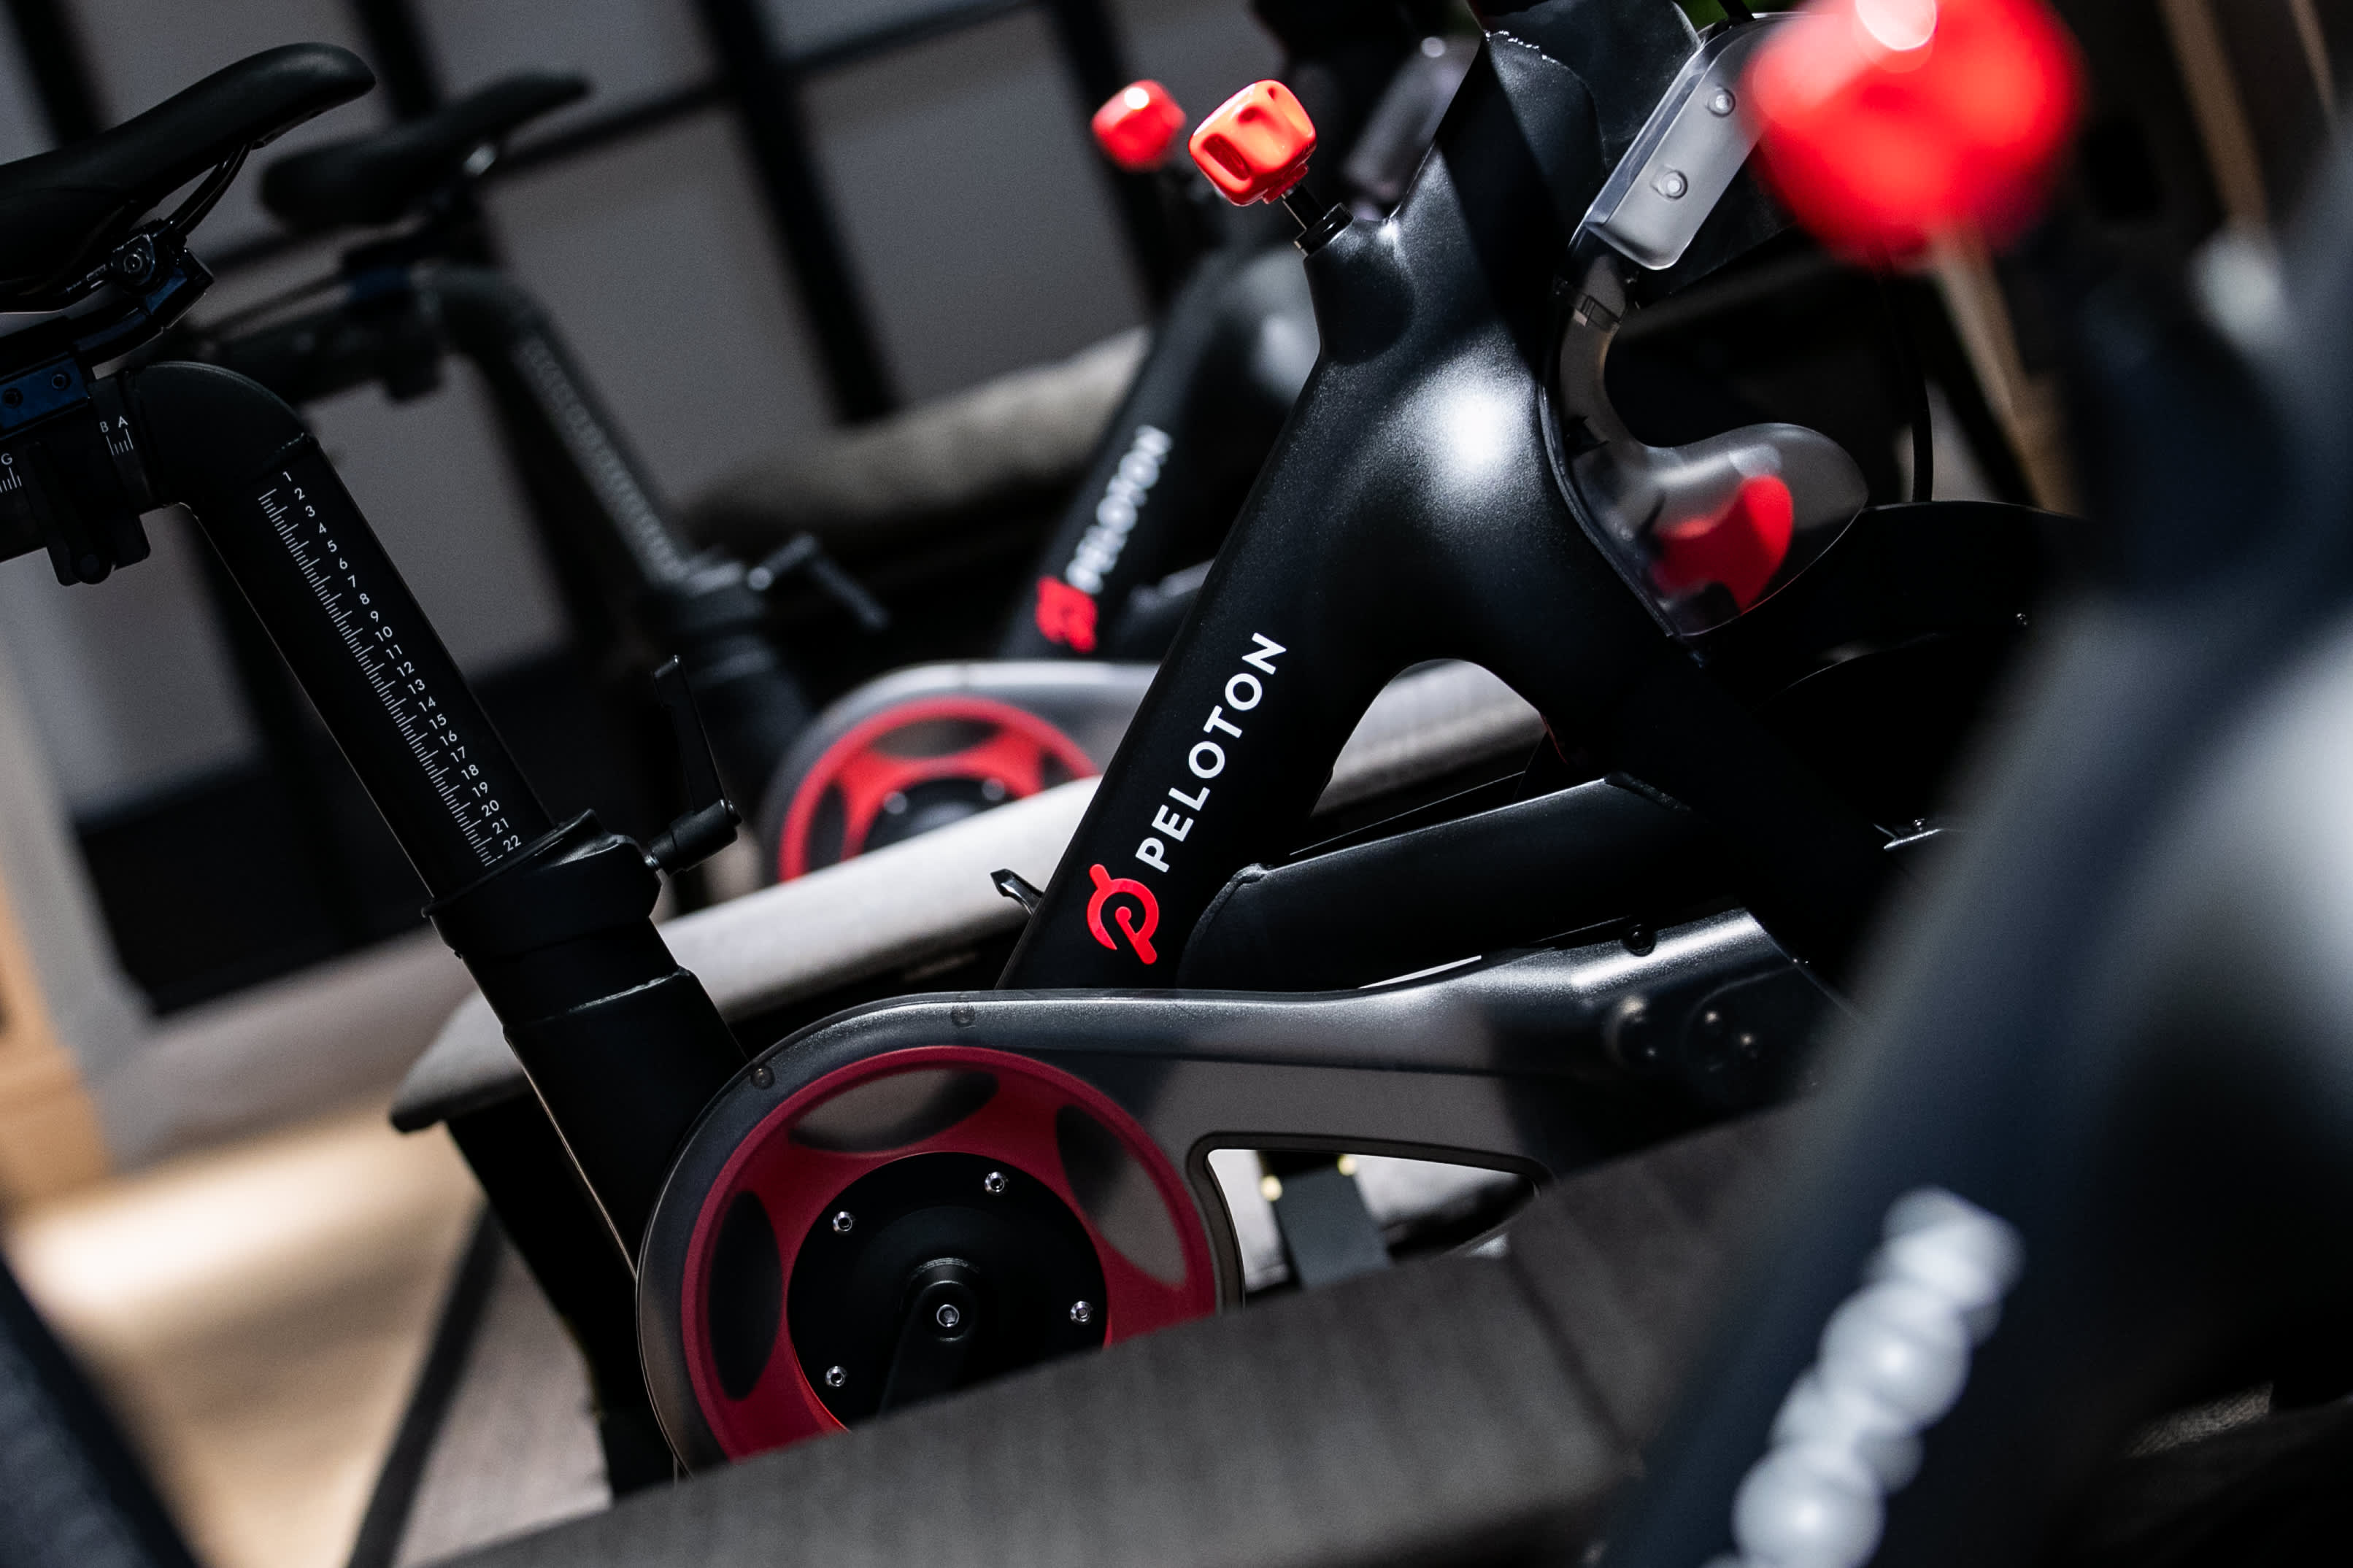 Peloton (PTON) reports earnings in the second quarter of 2021, with sales beating